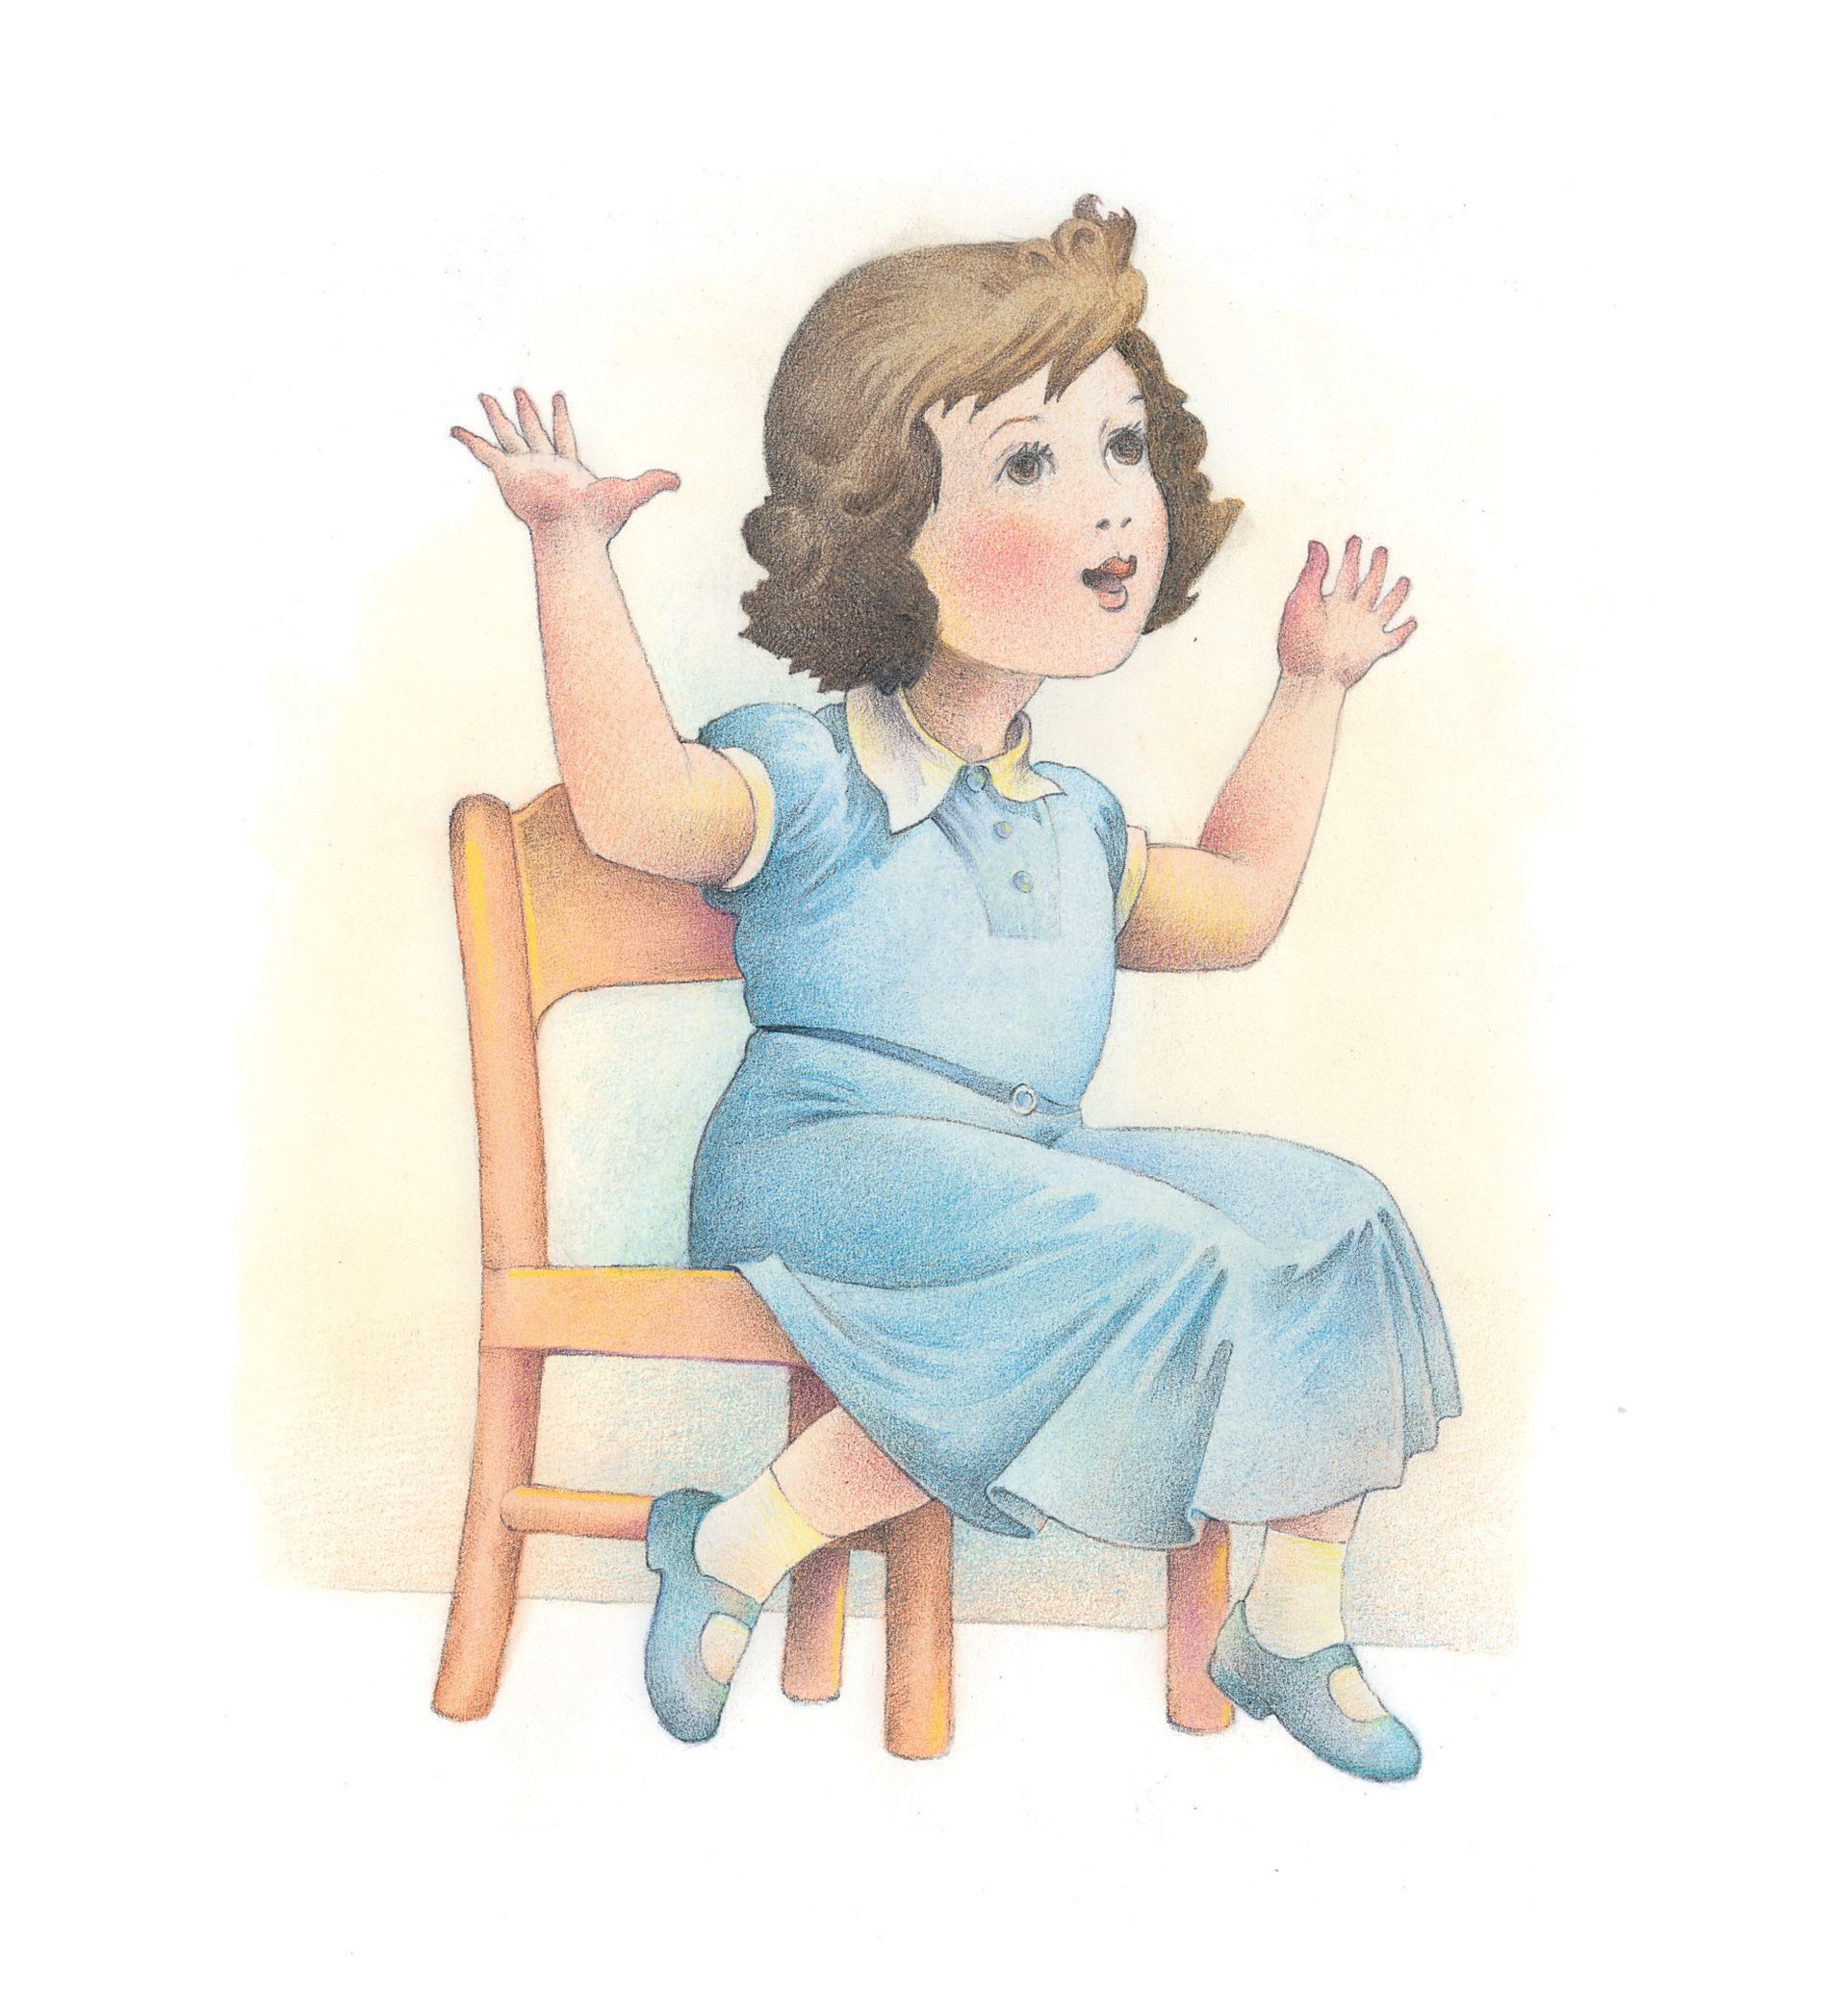 A girl sitting in a chair, singing a song in Primary. From the Children’s Songbook, page 271, “I Wiggle”; watercolor illustration by Richard Hull.